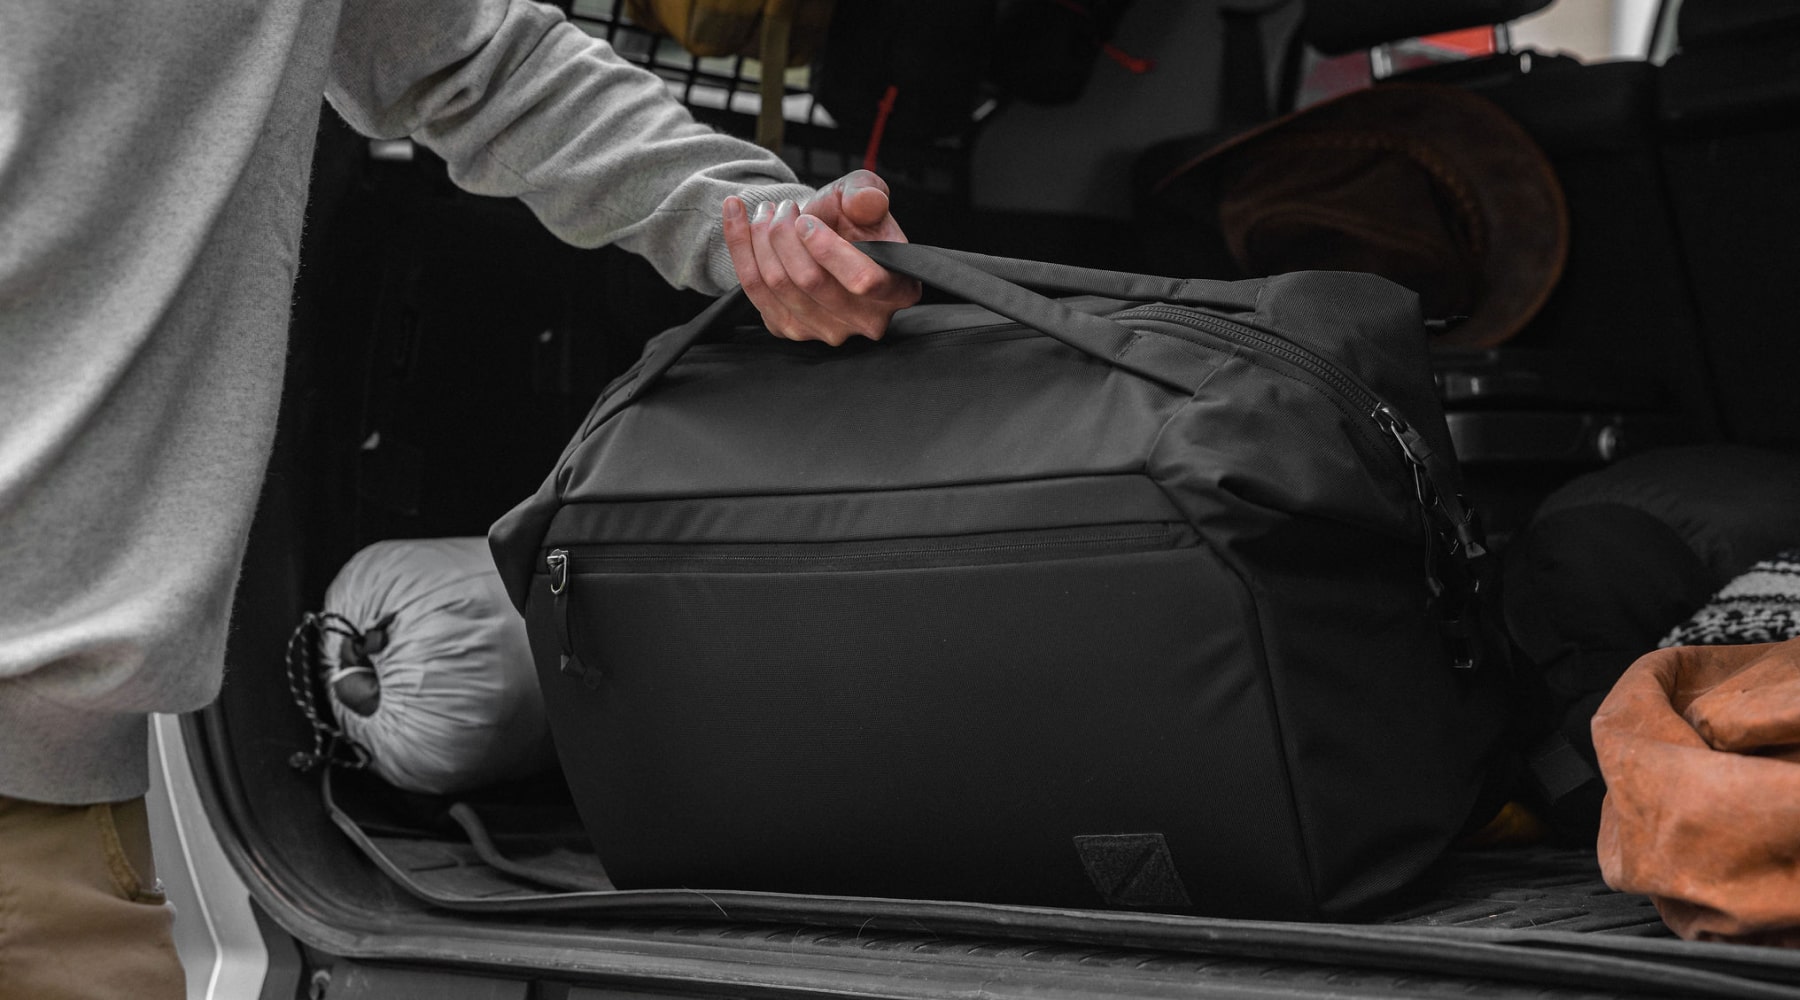 Transit Duffel 35L comes with ergonomic curved handles